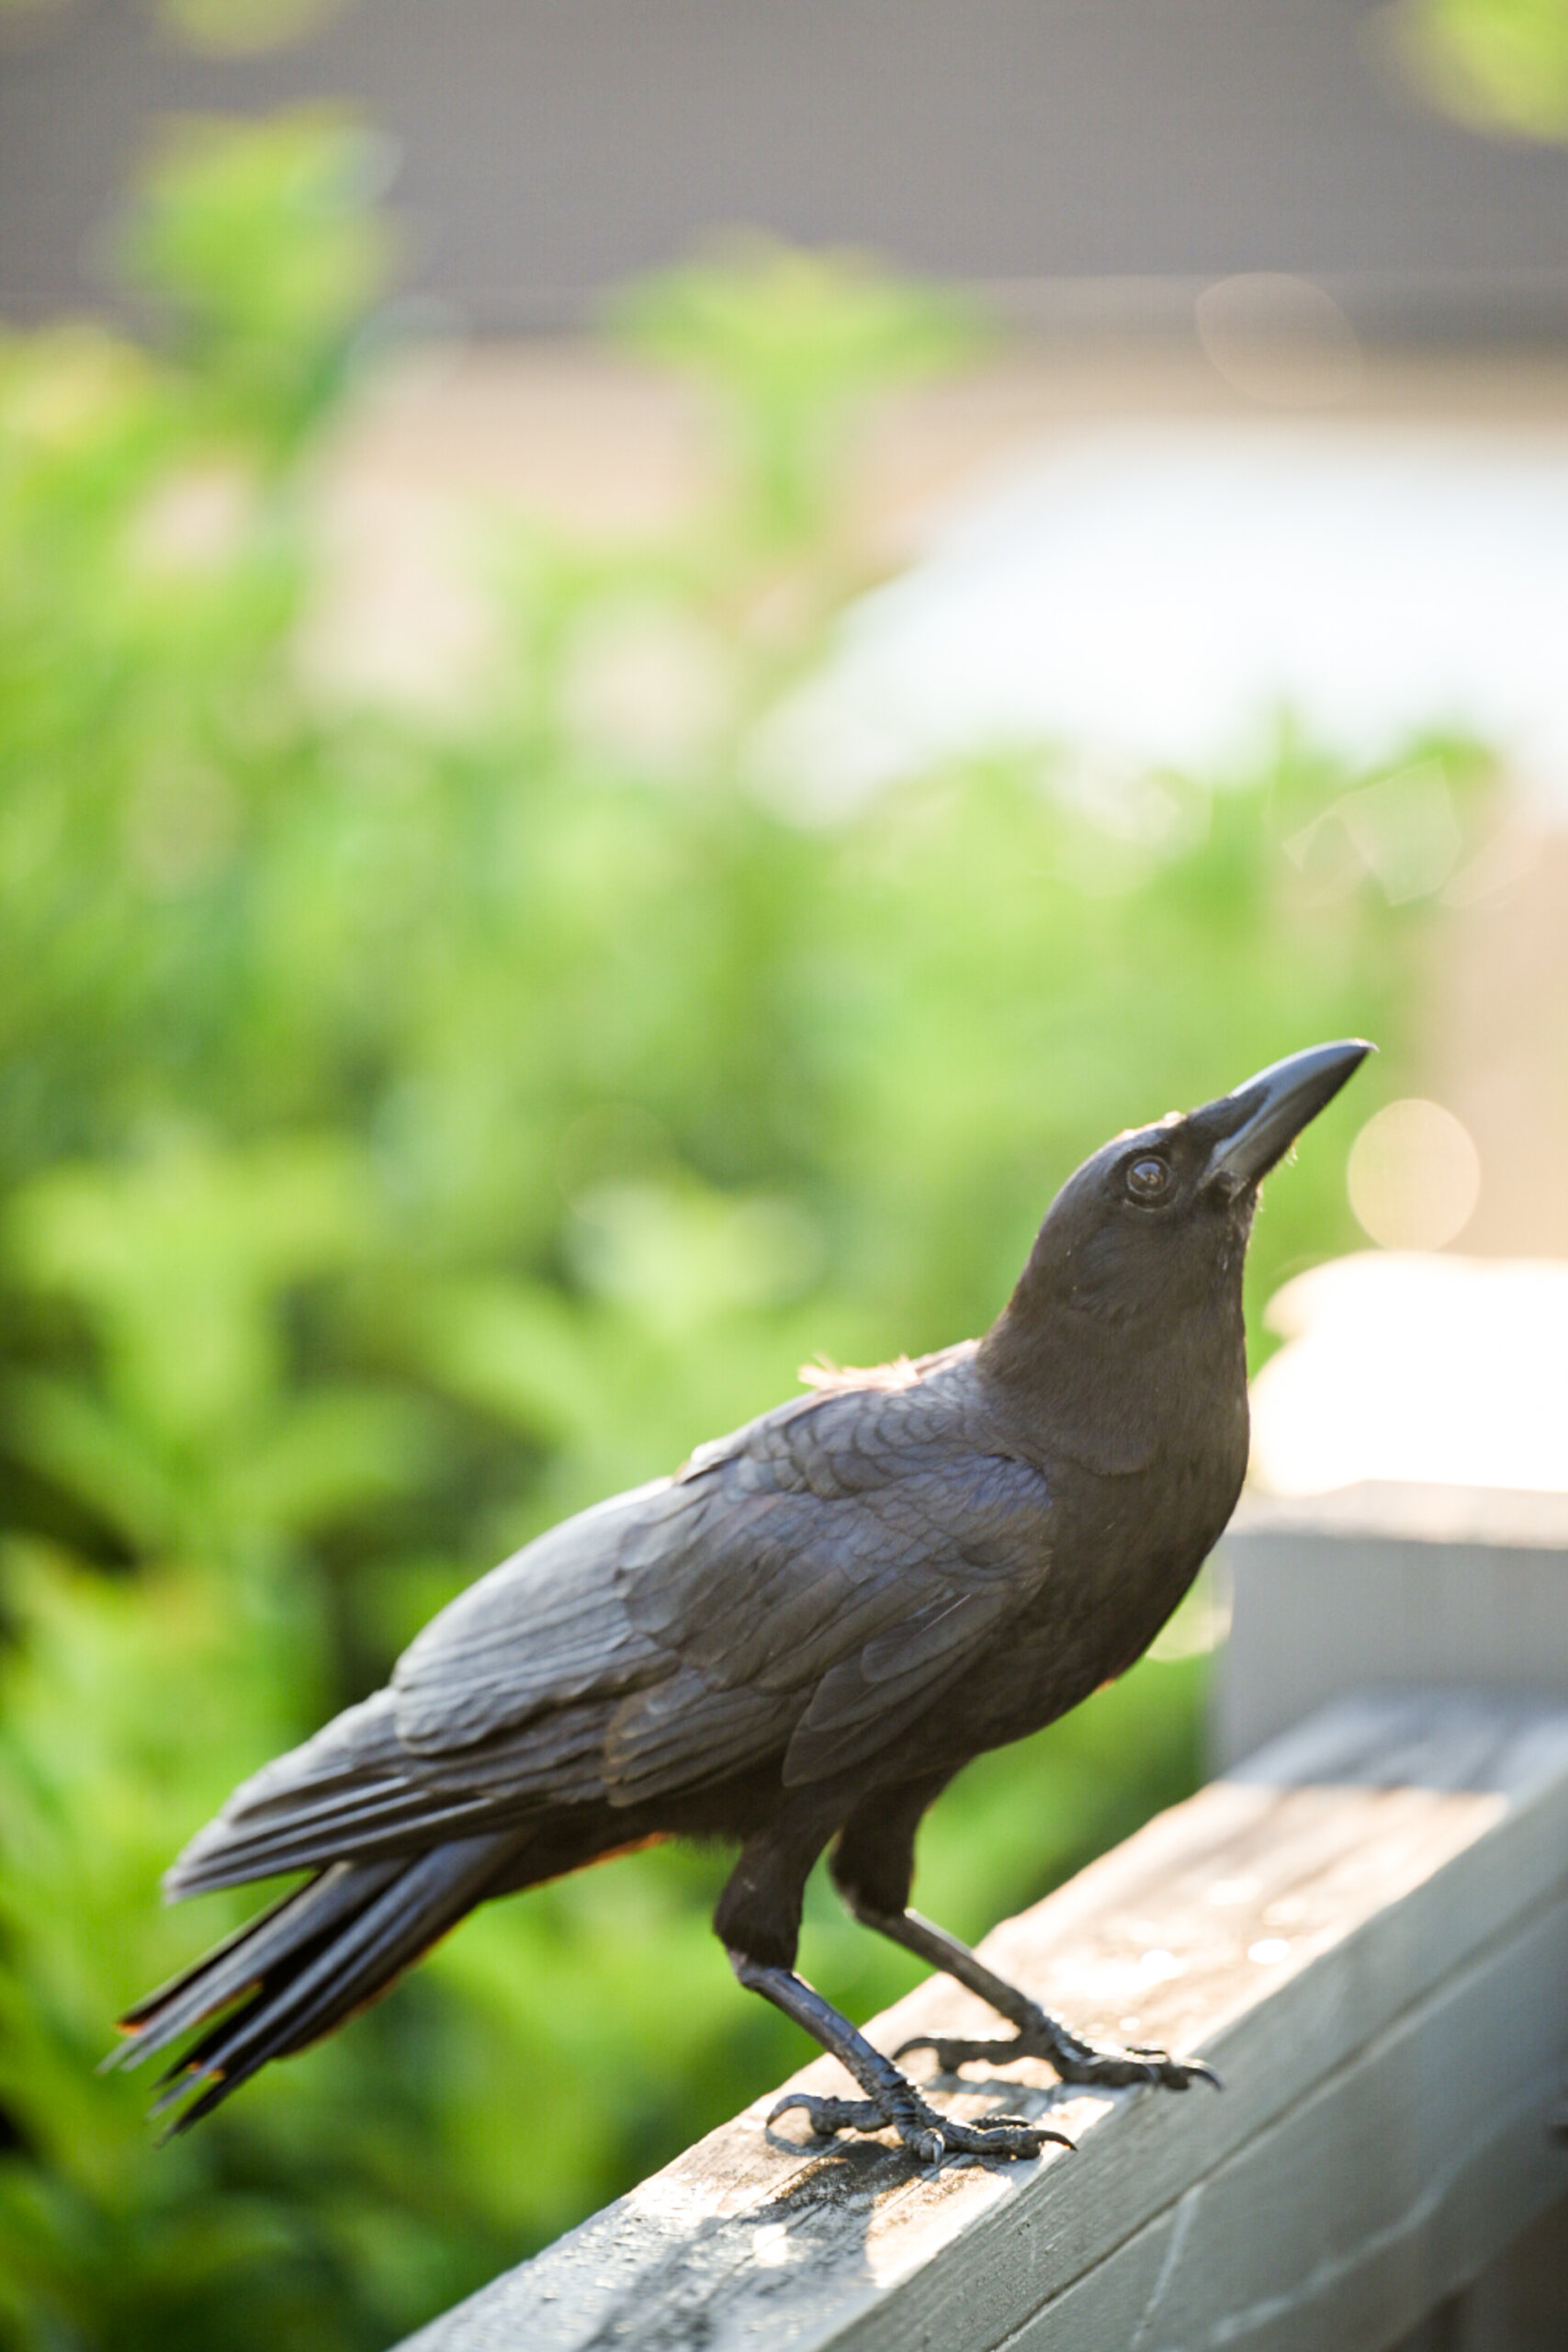 A black crow stands on a wooden railing with a blurry background of green foliage.